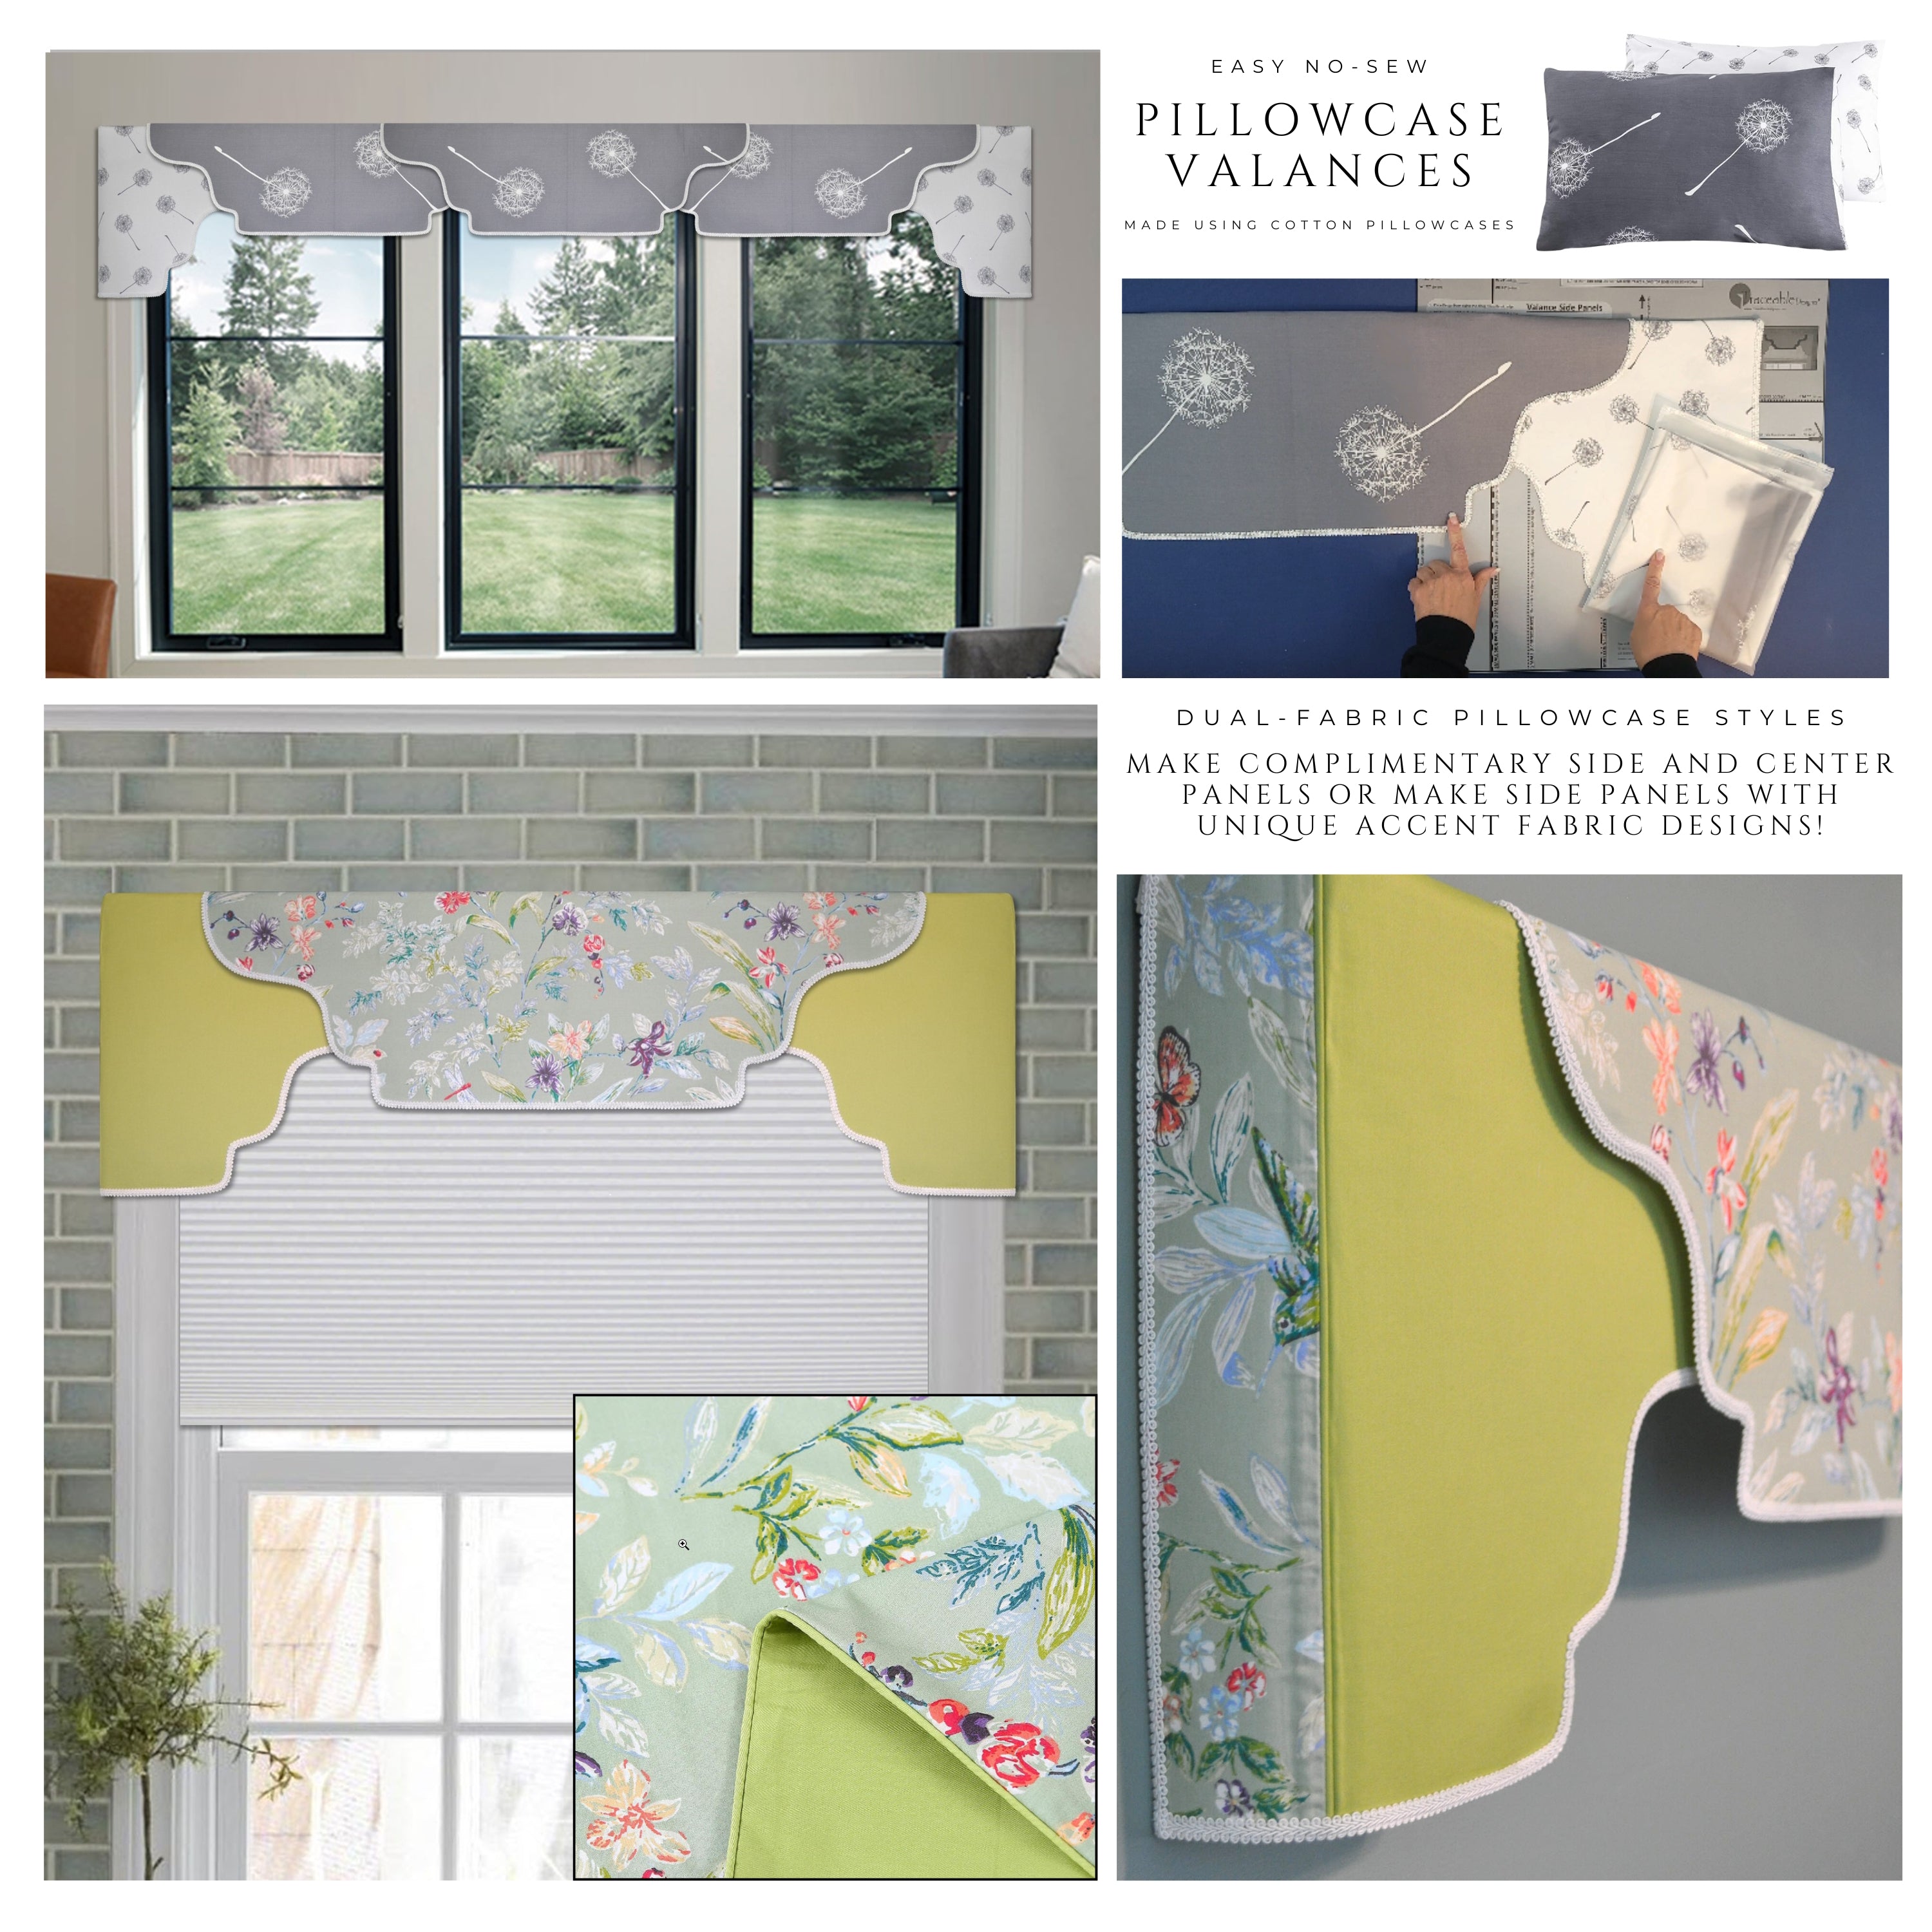 Traceable Designer arched style no-sew cornice valance kit inlcudes traceable valance design forms. Use pillowcases to make custom valances without sewing. Use a 2.5" wide pocket curtain rod.